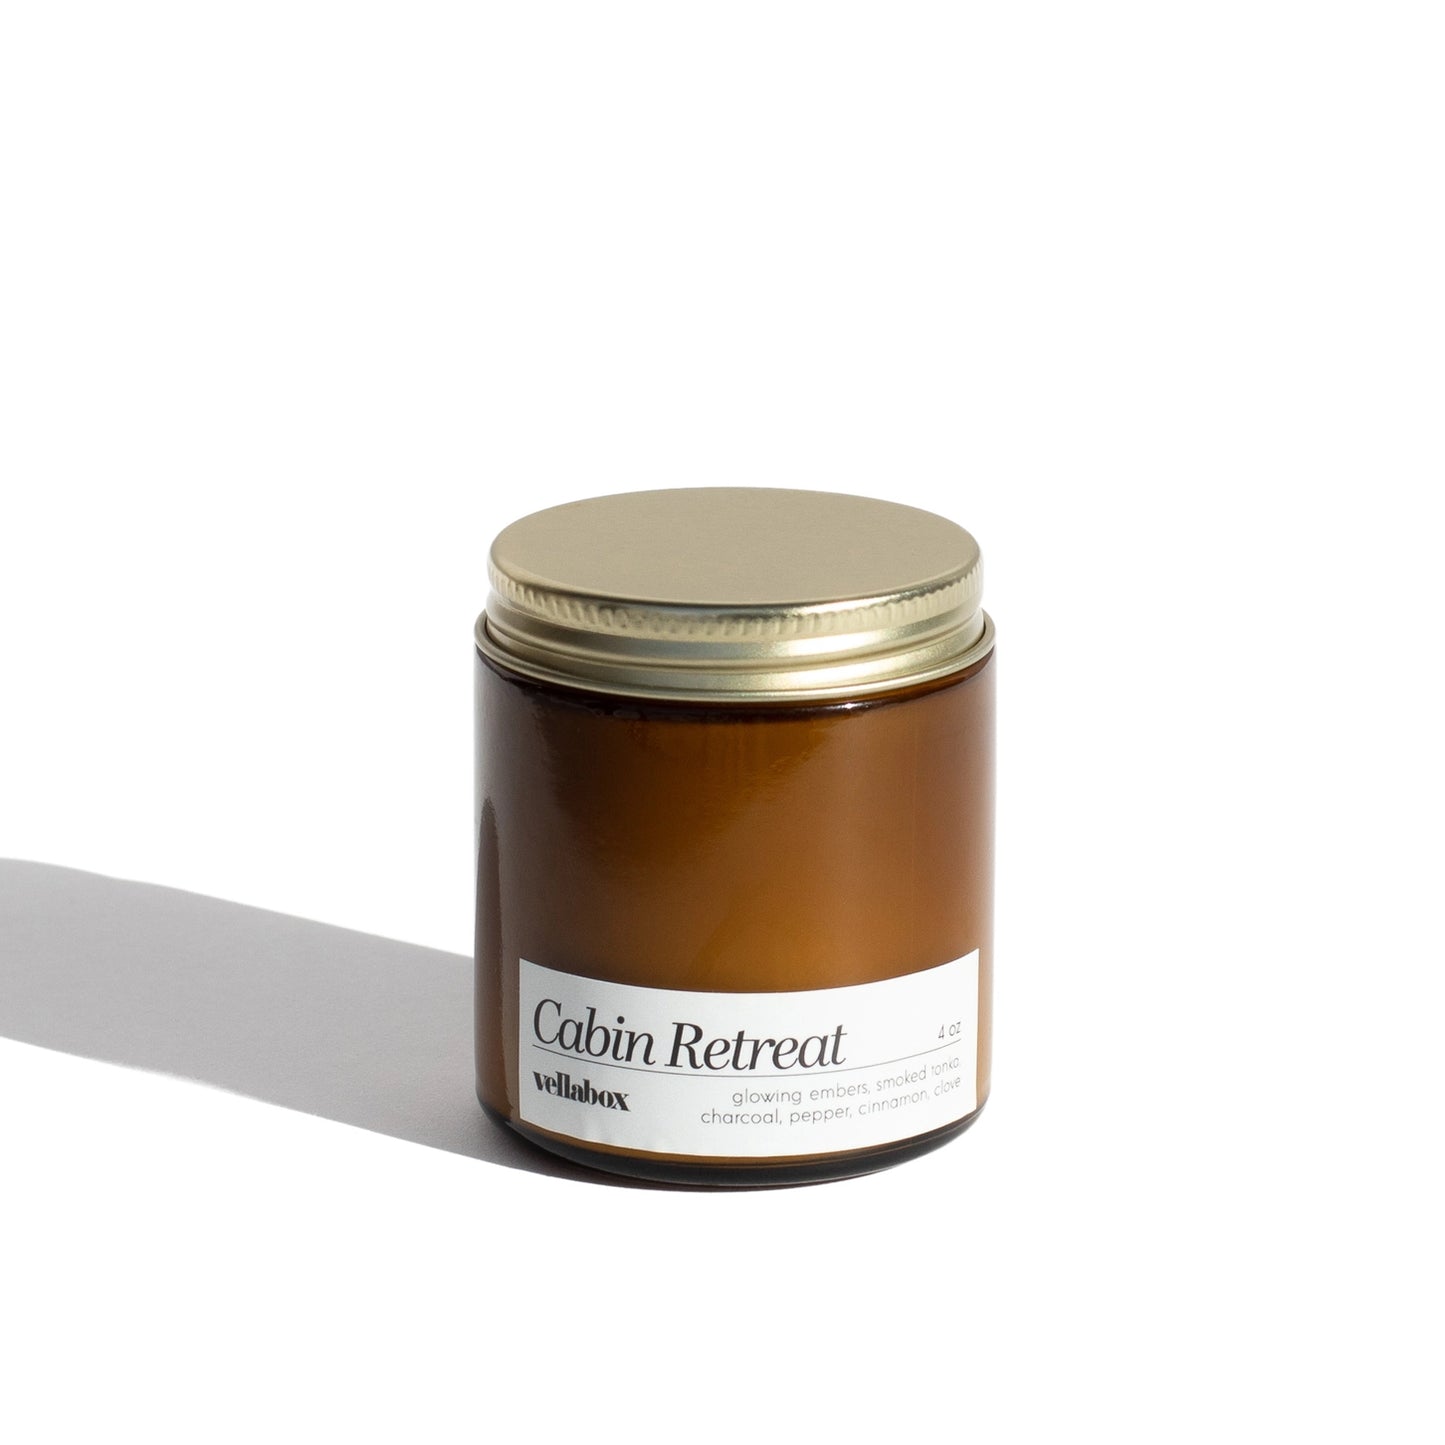 Cabin Retreat Soy Wax Candle by Vellabox